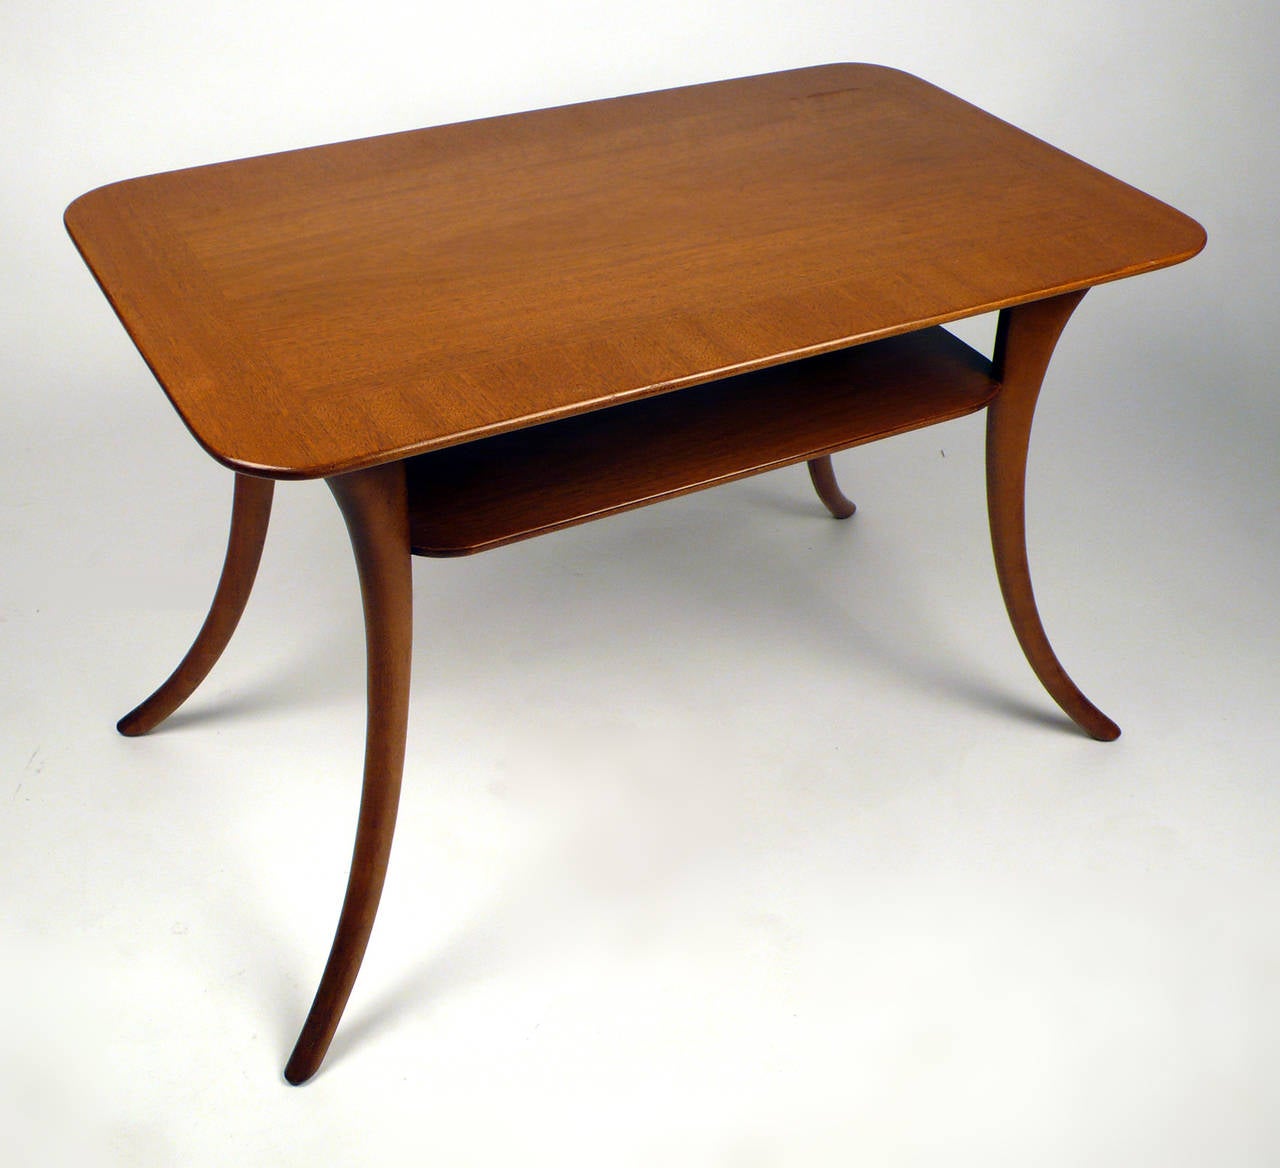 Elegant two-tier table by T.H. Robsjohn-Gibbings for Widdicomb in the original sherry finished Mahogany.